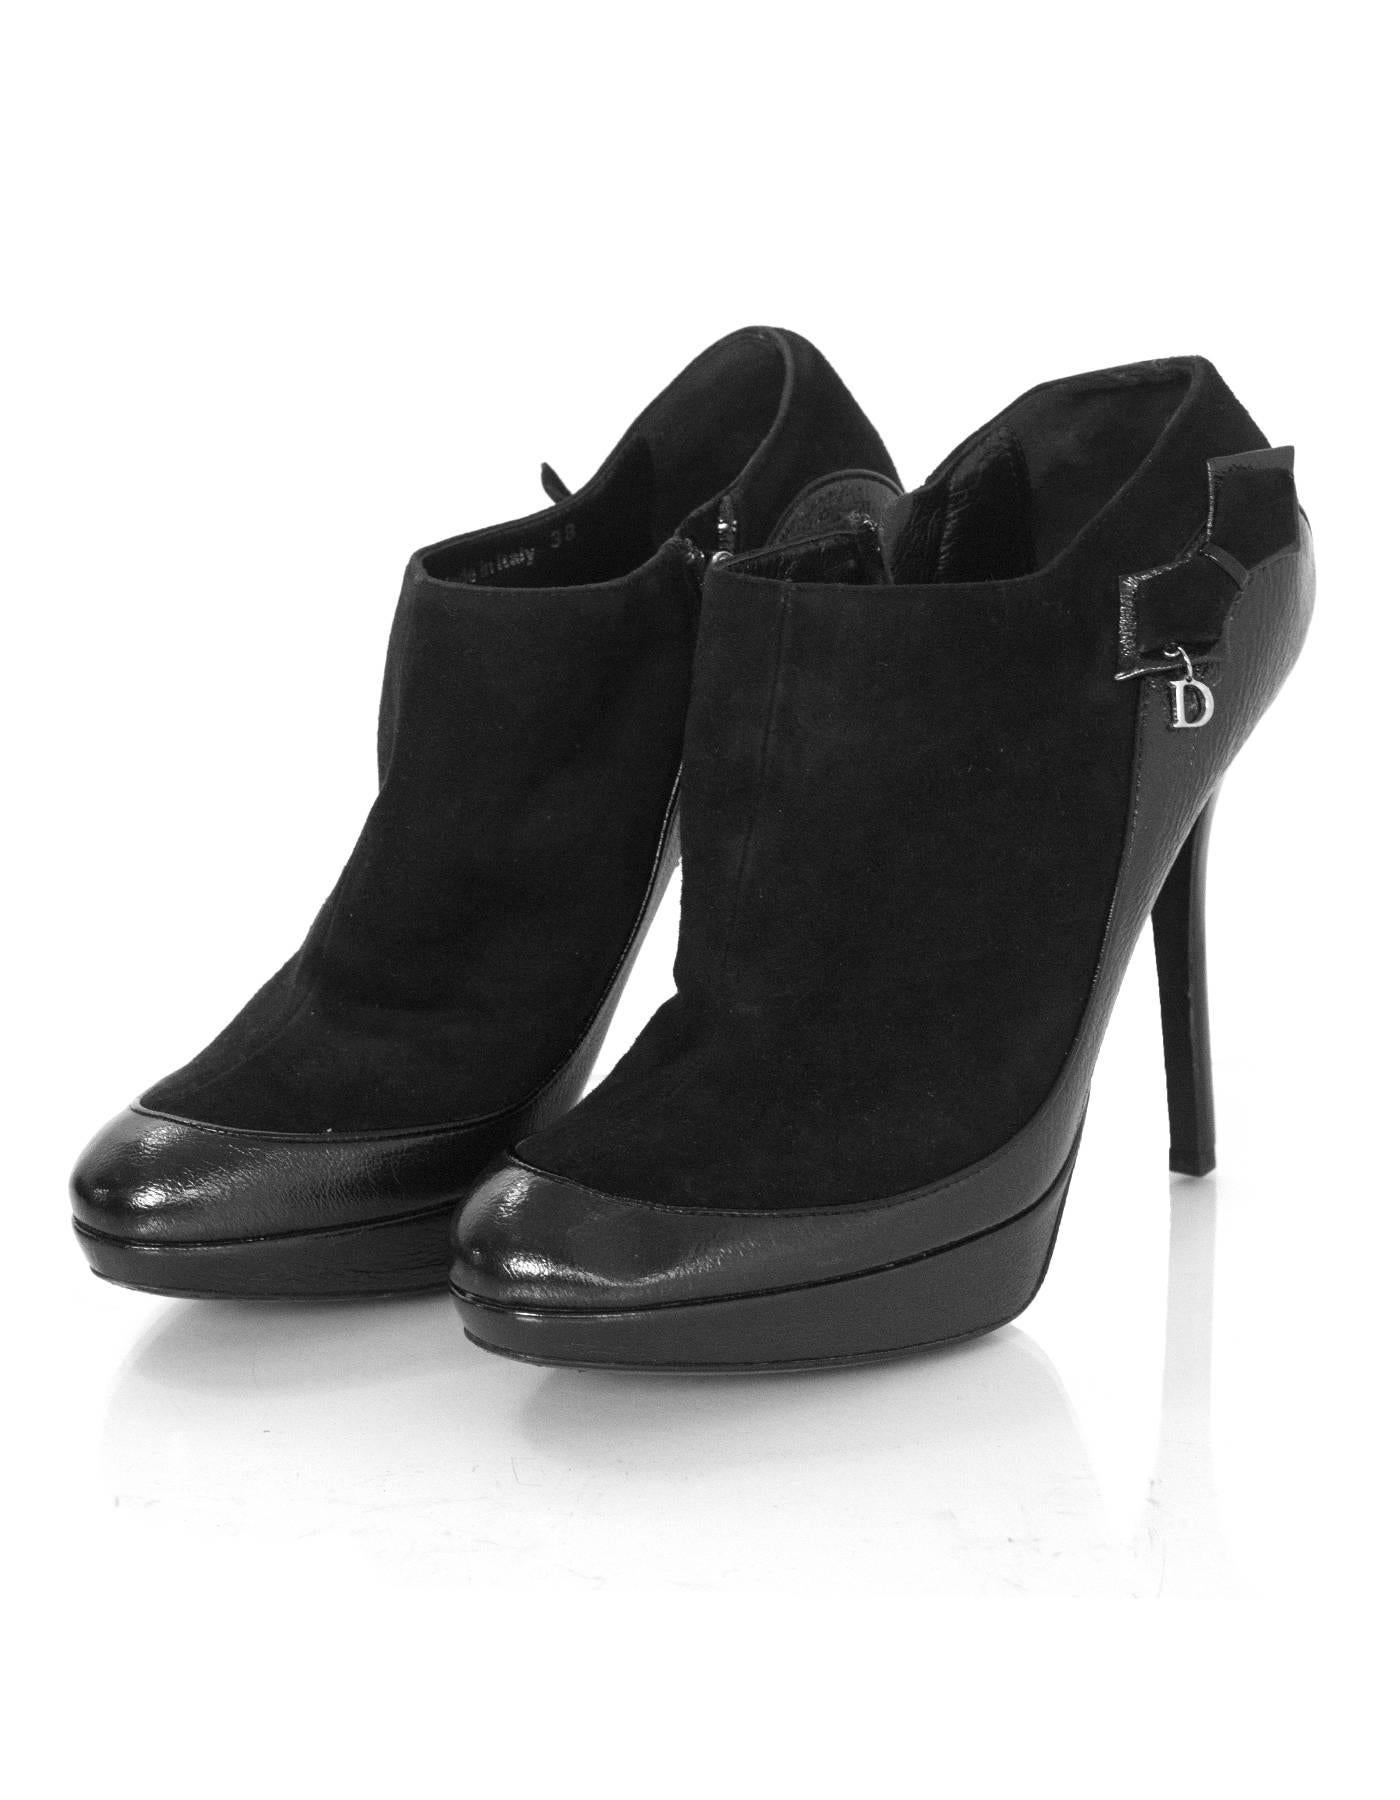 Christian Dior Black Suede & Leather Booties Sz 38

Features bow detail with D charm

Made In: Italy
Color: Black
Materials: Suede, leather
Closure/Opening: Side zip closure
Sole Stamp: Dior 38
Overall Condition: Excellent pre-owned condition with